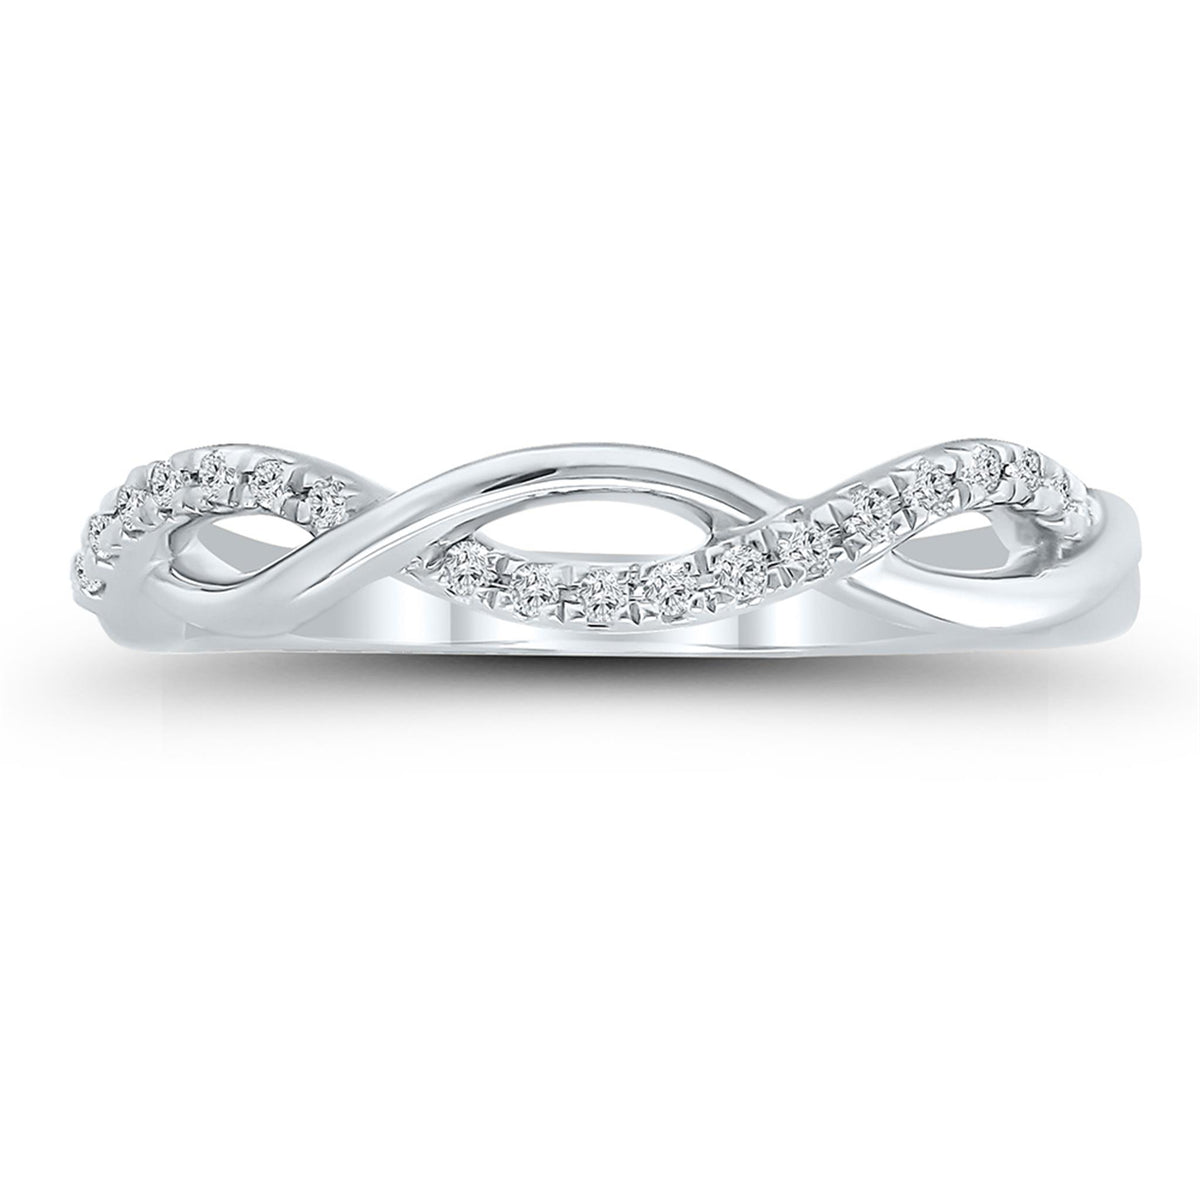 10Kt White Gold Infinity Twist Ring With 0.10cttw Natural Diamonds